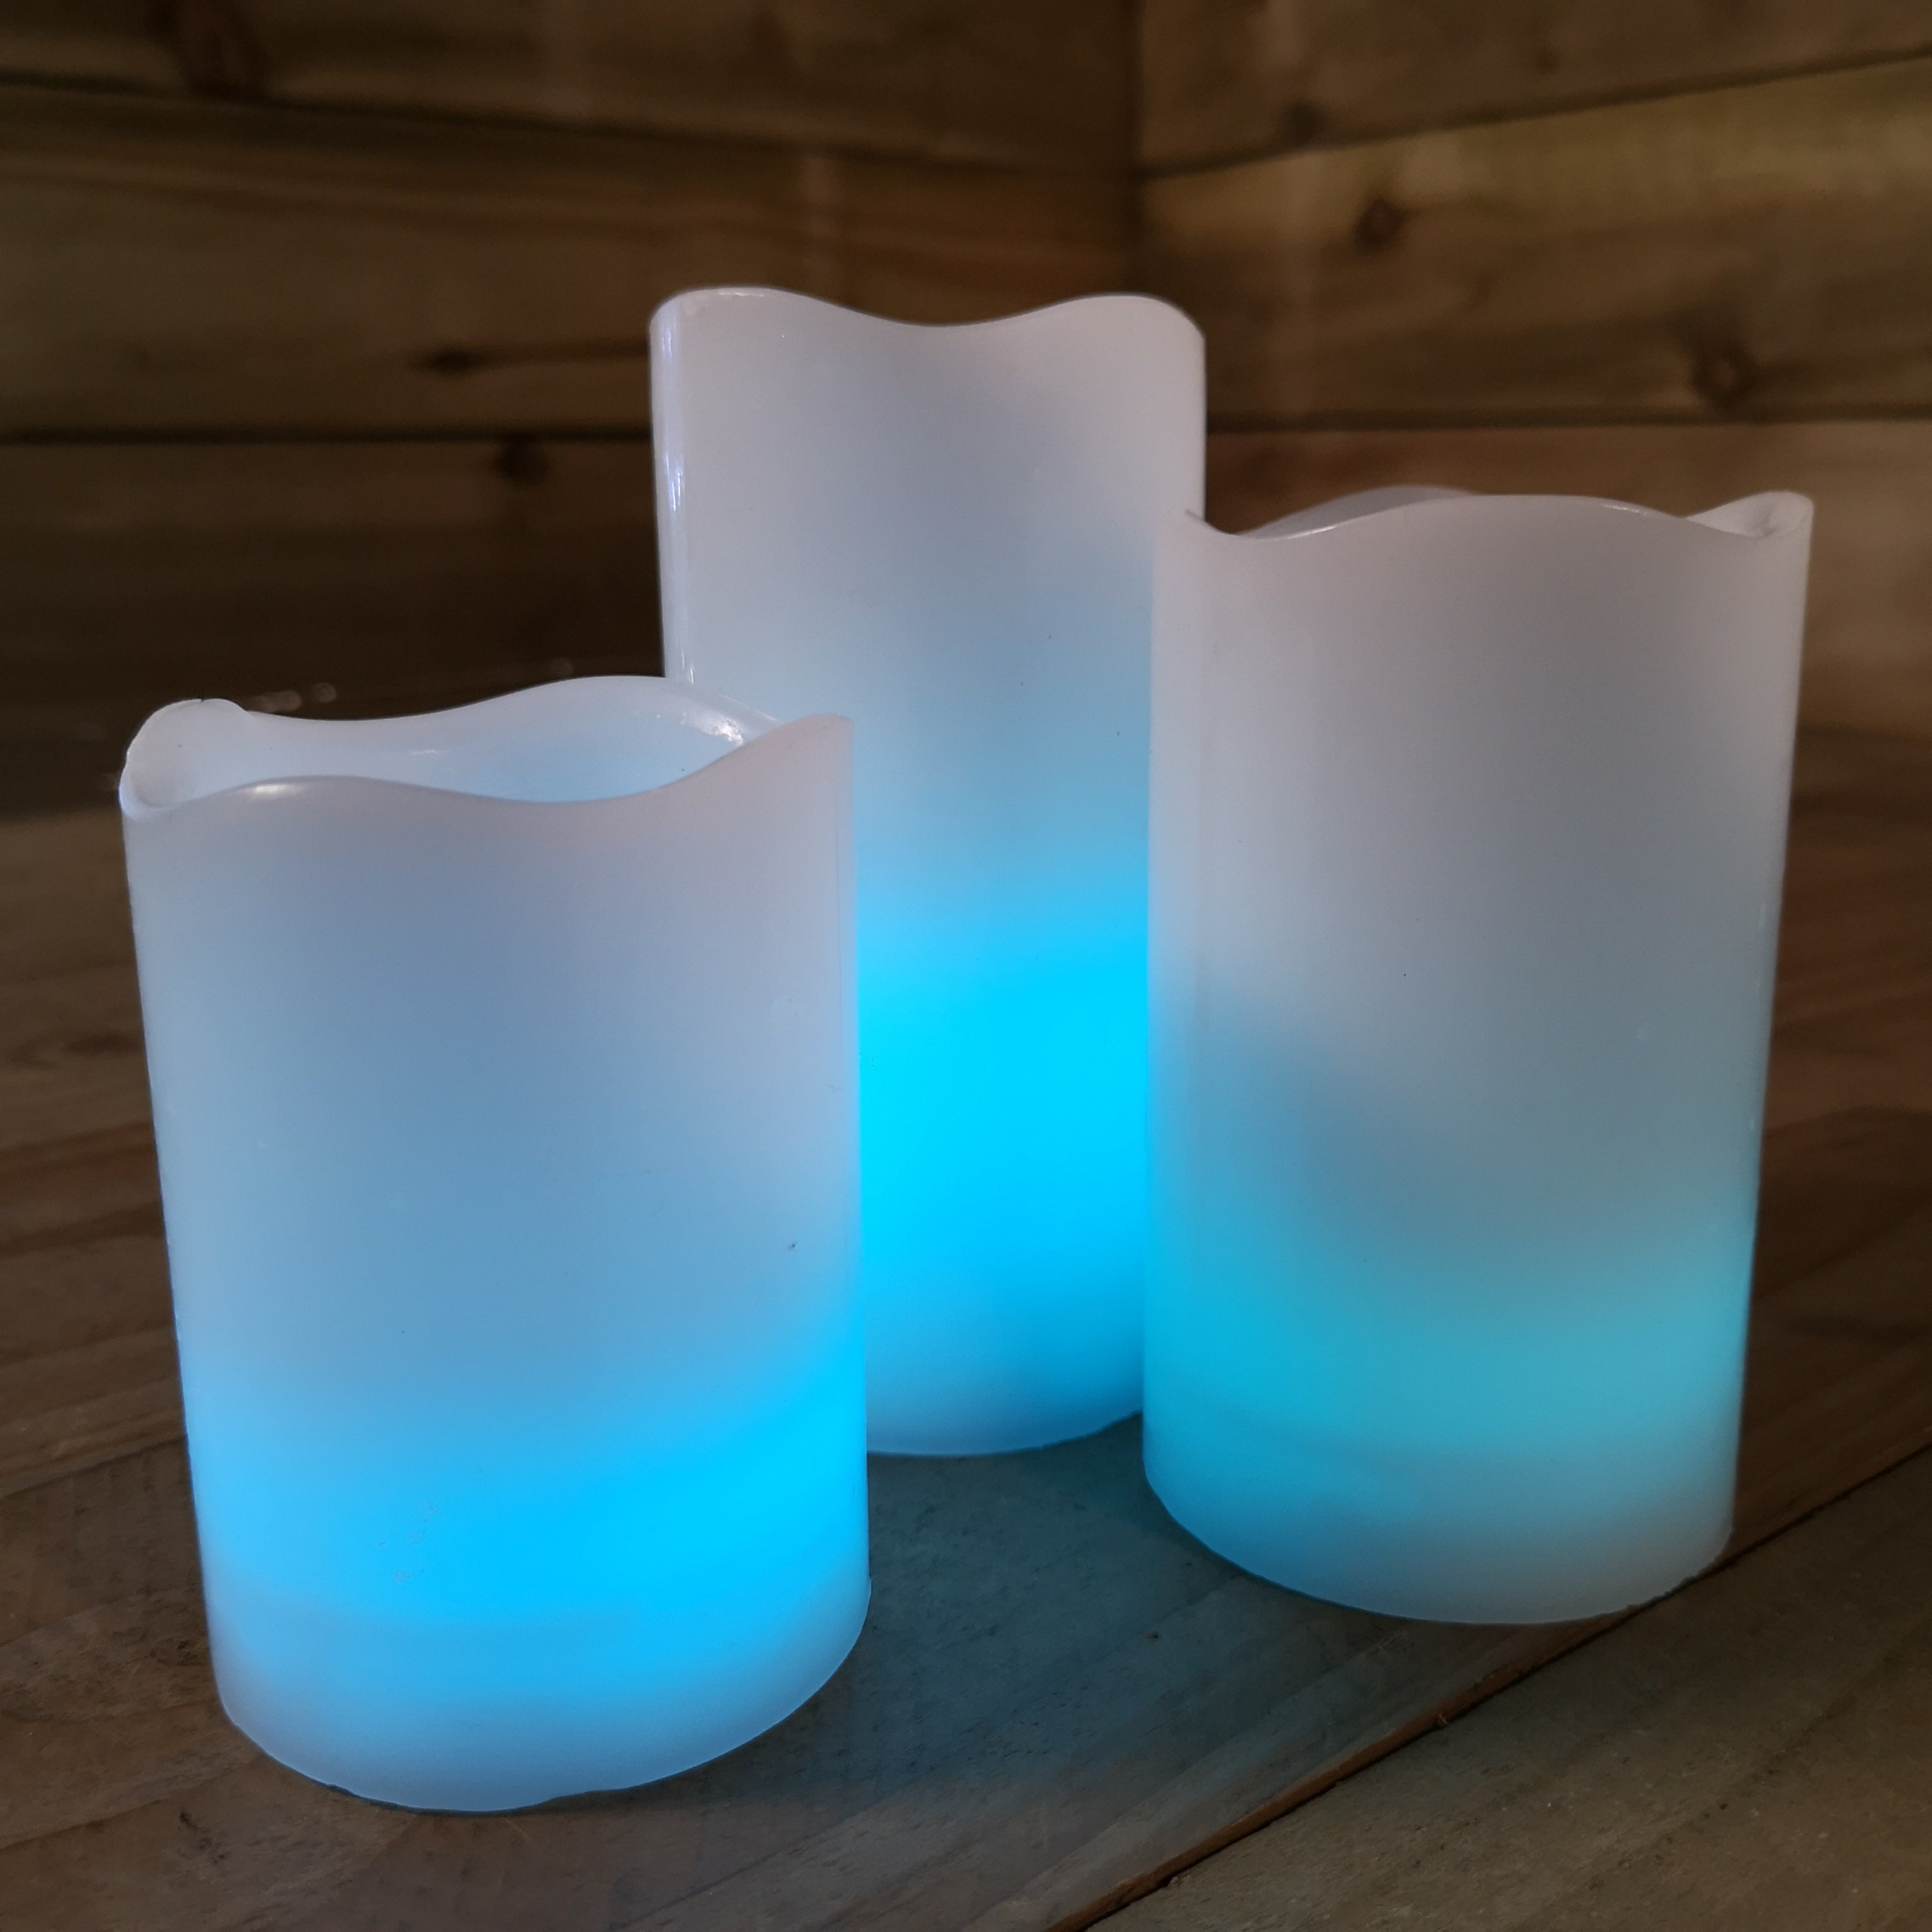 Snowtime Set 3 LED Colour Changing Candles Remote Control with Timer & Function Battery Operated